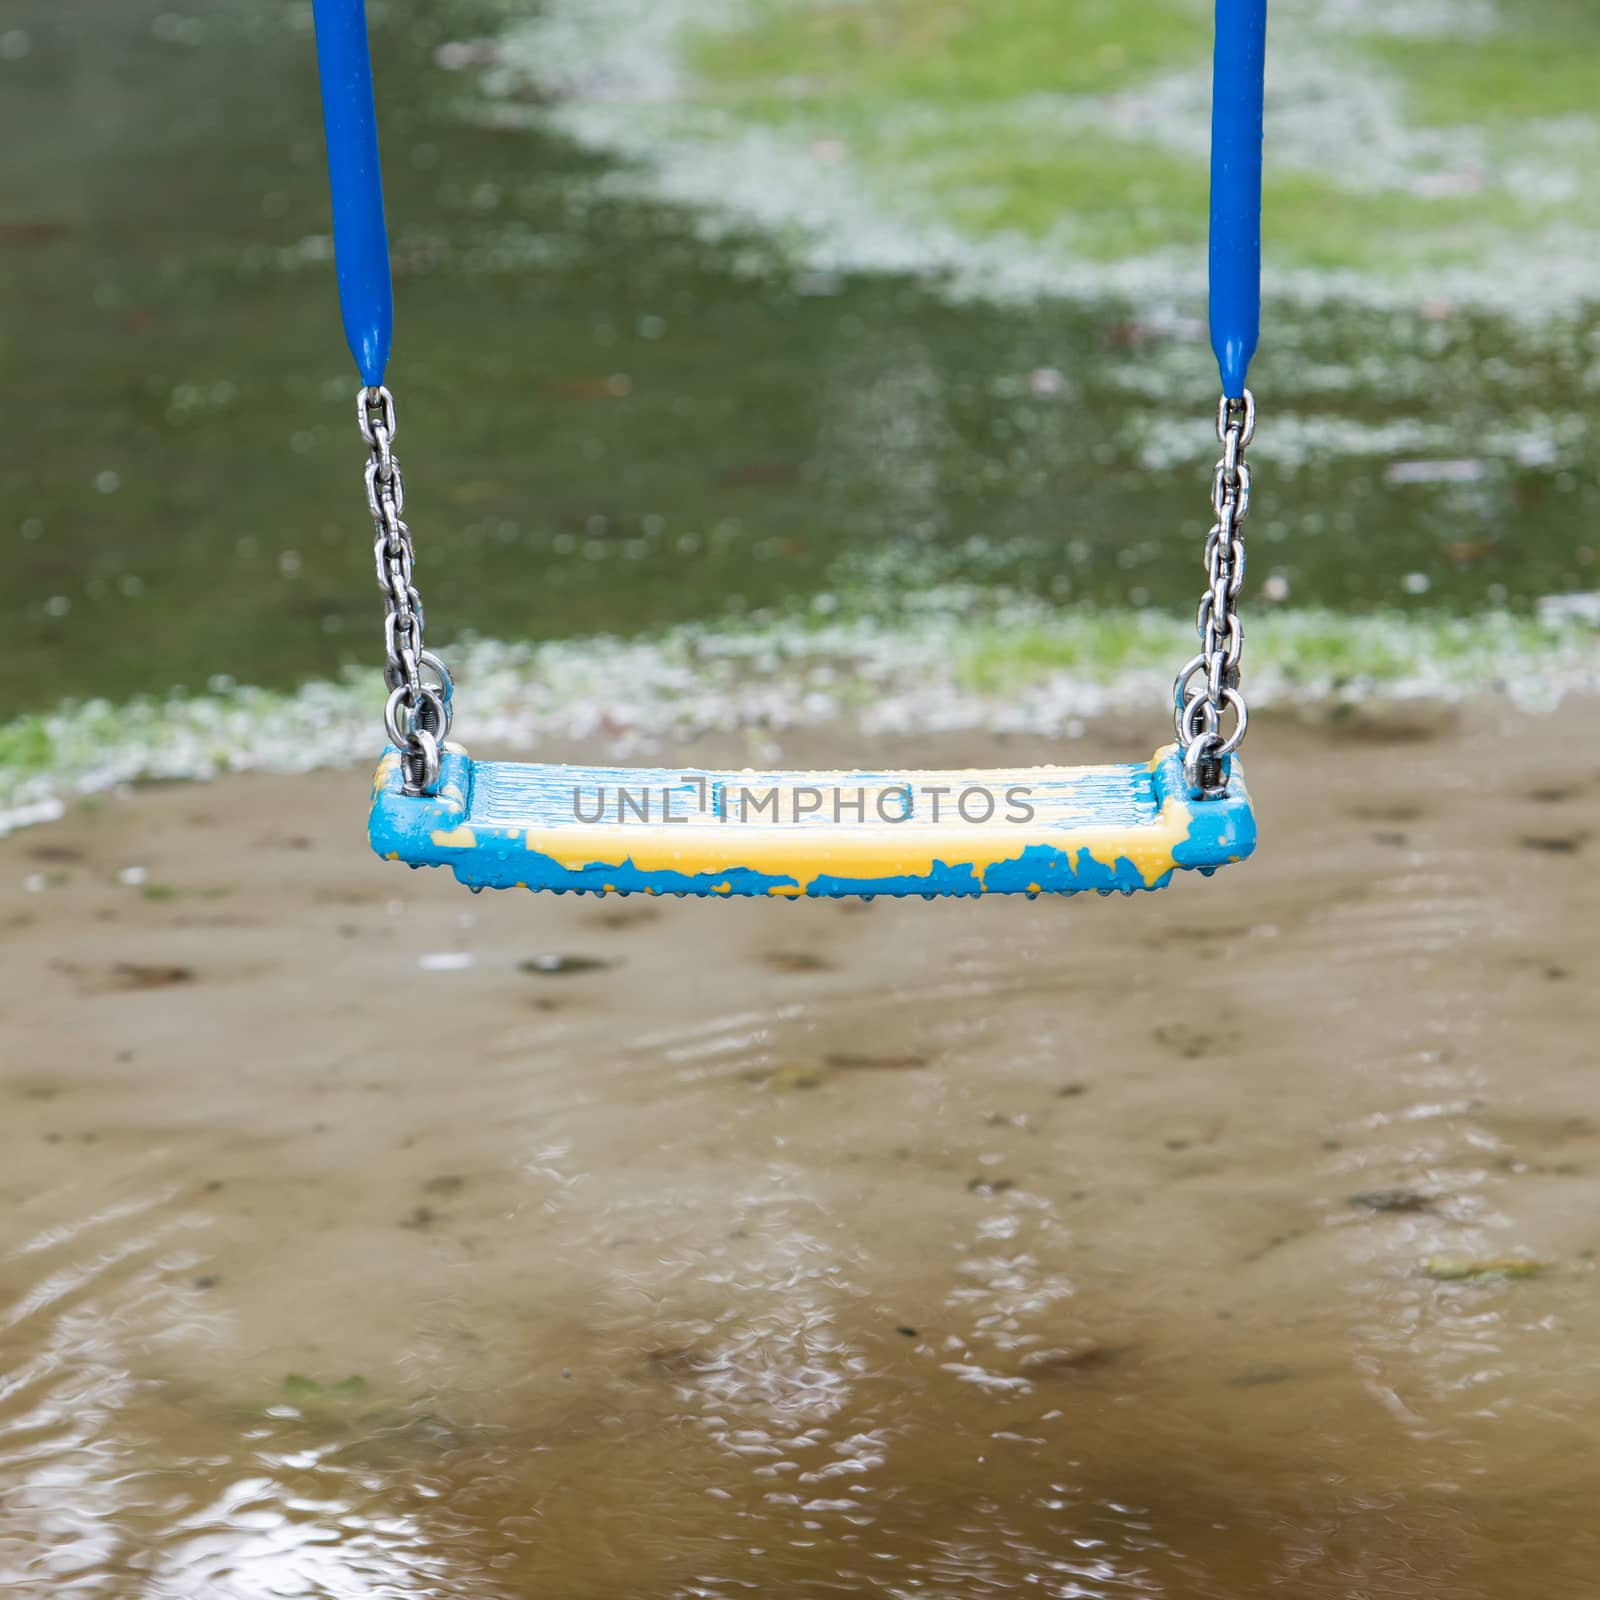 Plastic swing hanging over a puddle by michaklootwijk